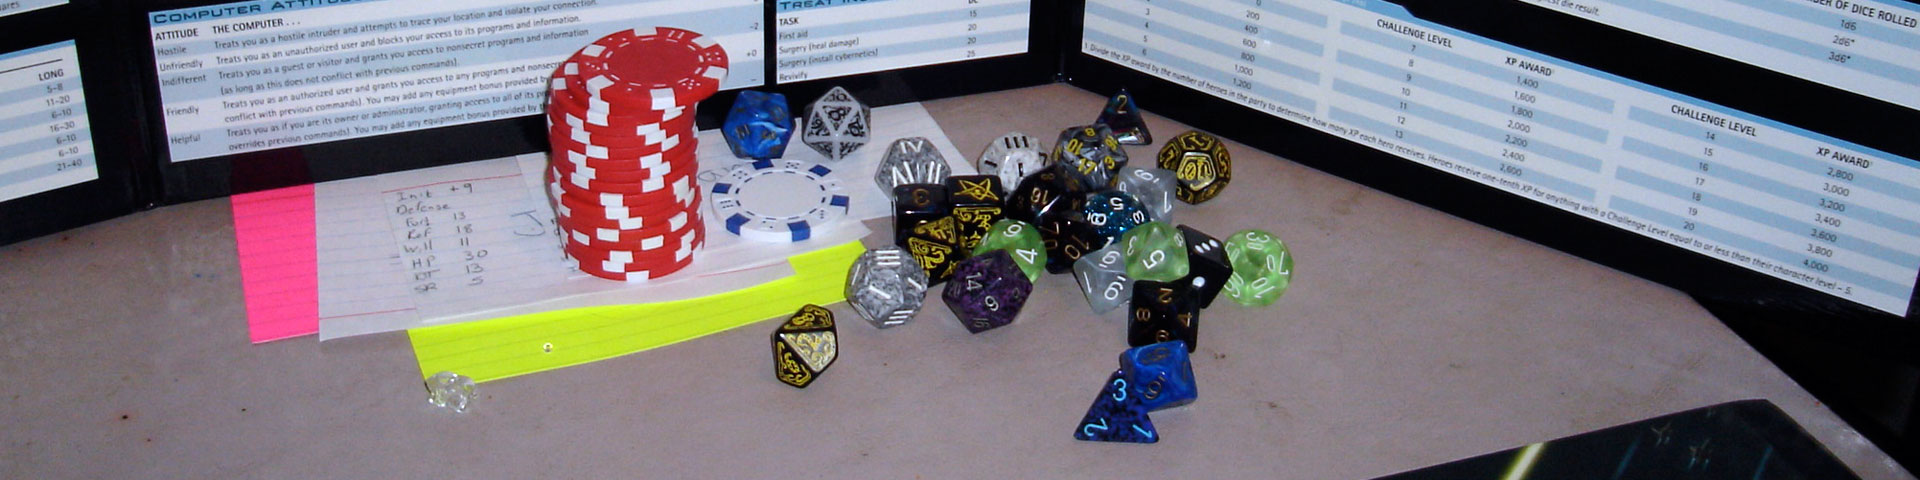 A stack of red poker chips and a pool of dice appear against the background of a Star Wars GM screen.